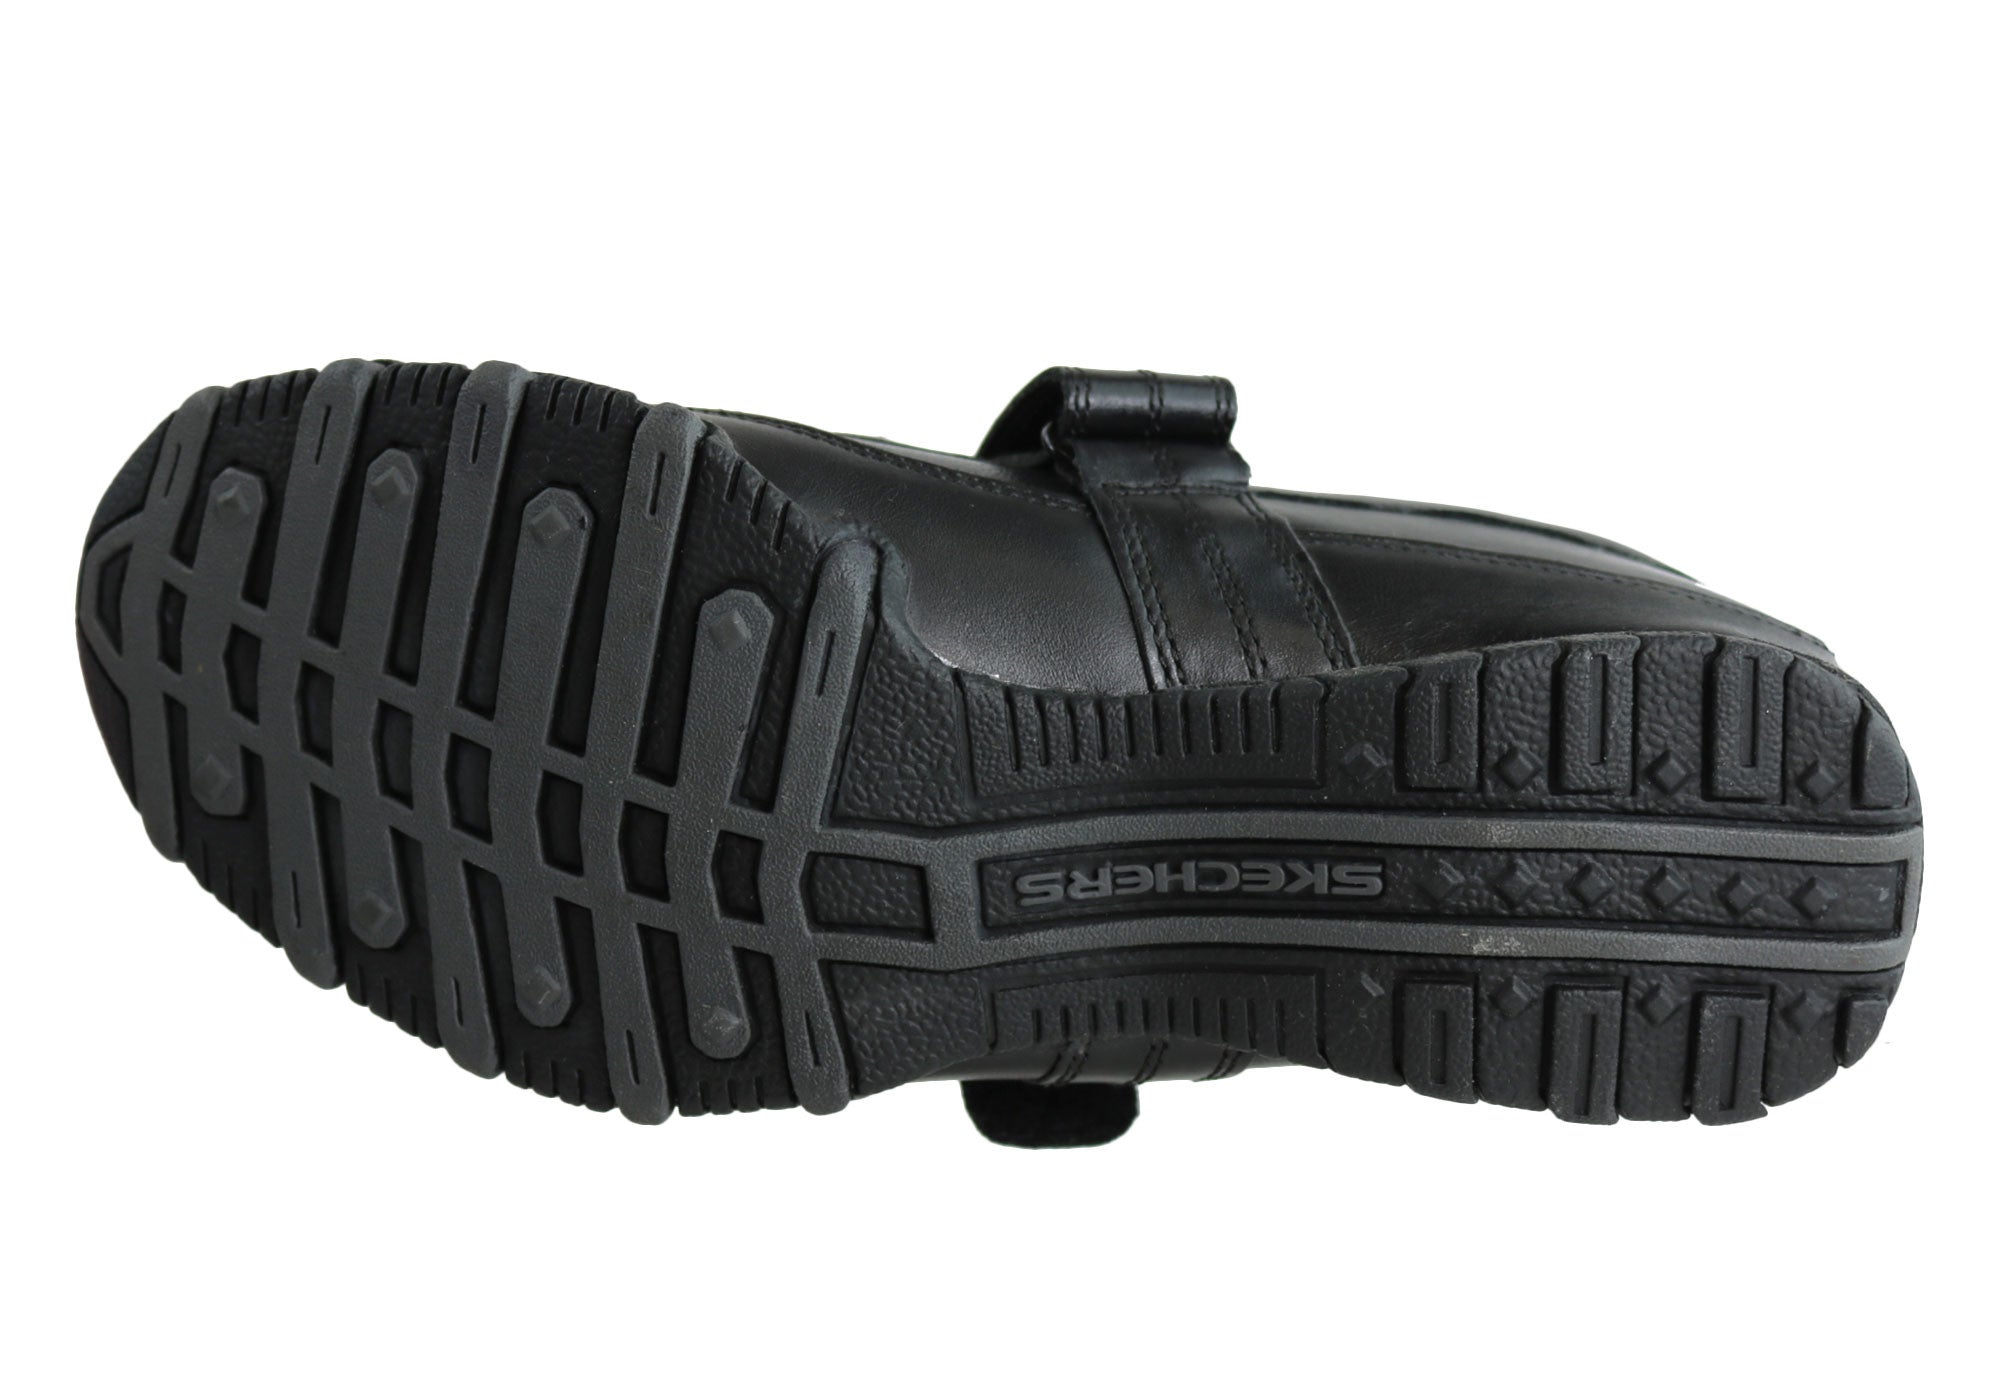 skechers bikers melodic mary jane shoes